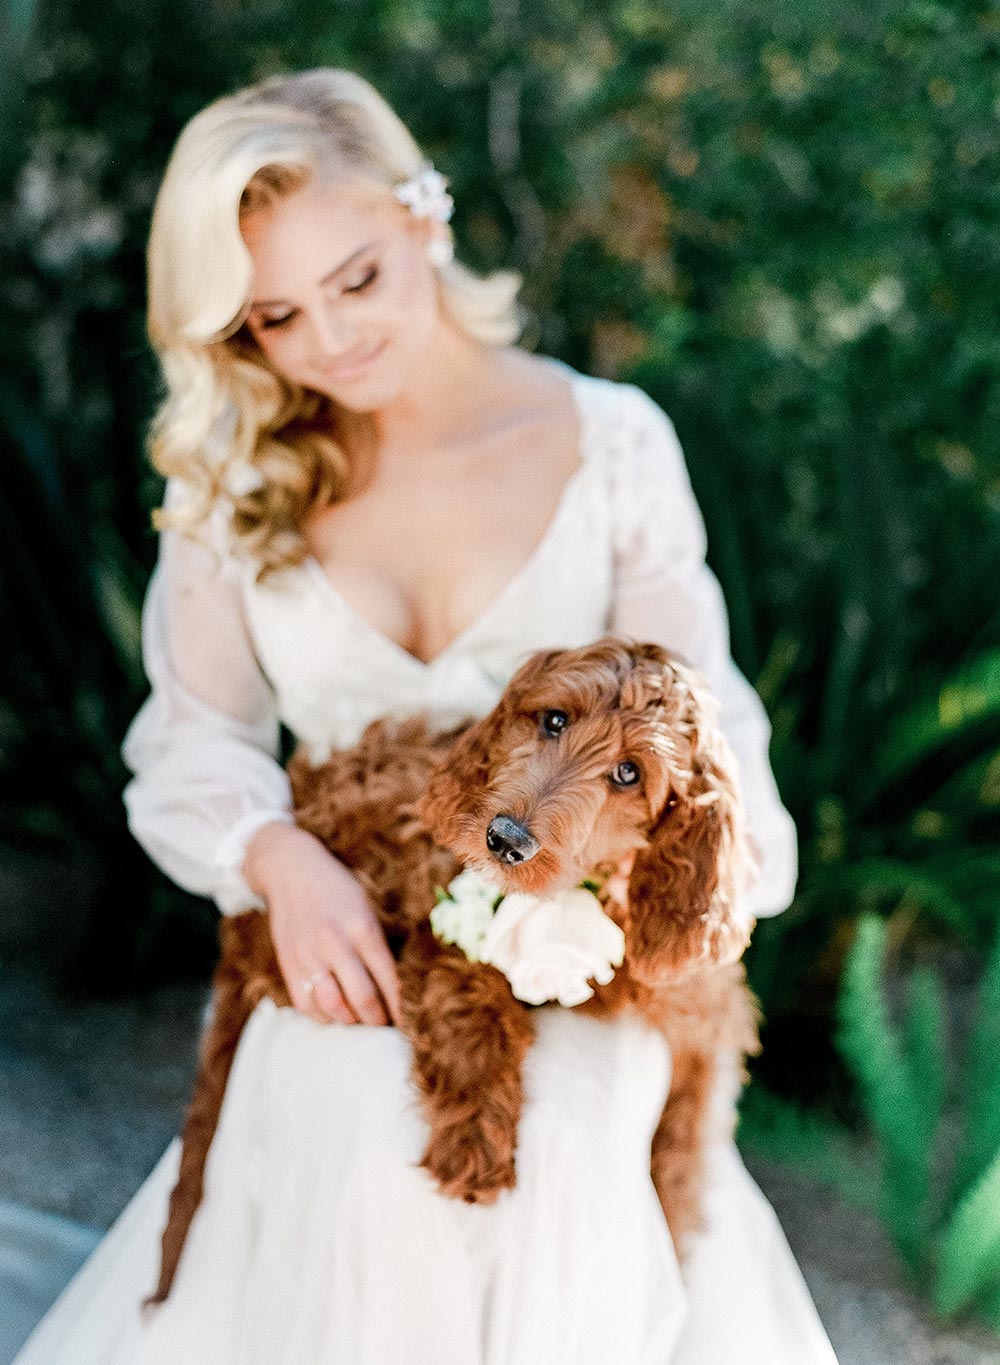 dog of honor goldendoodle pets in weddings